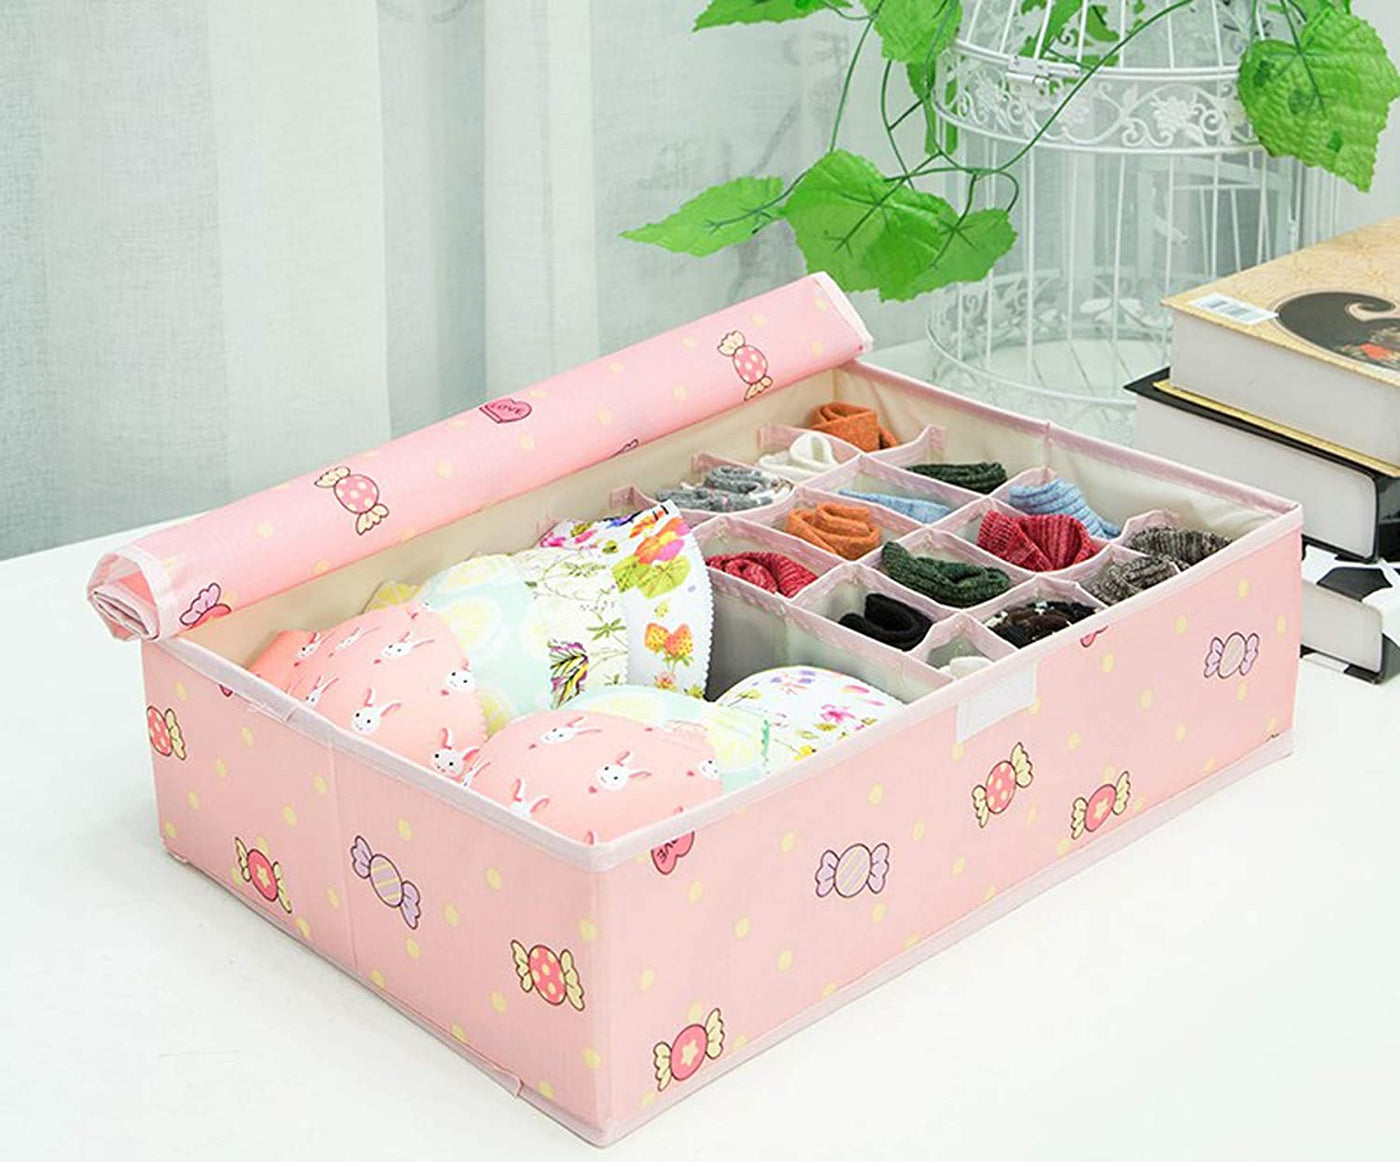 Innerwear Organizer 16+1 Compartment Non Woven Foldable Fabric Storage Box for Closet - (Pink Candy)